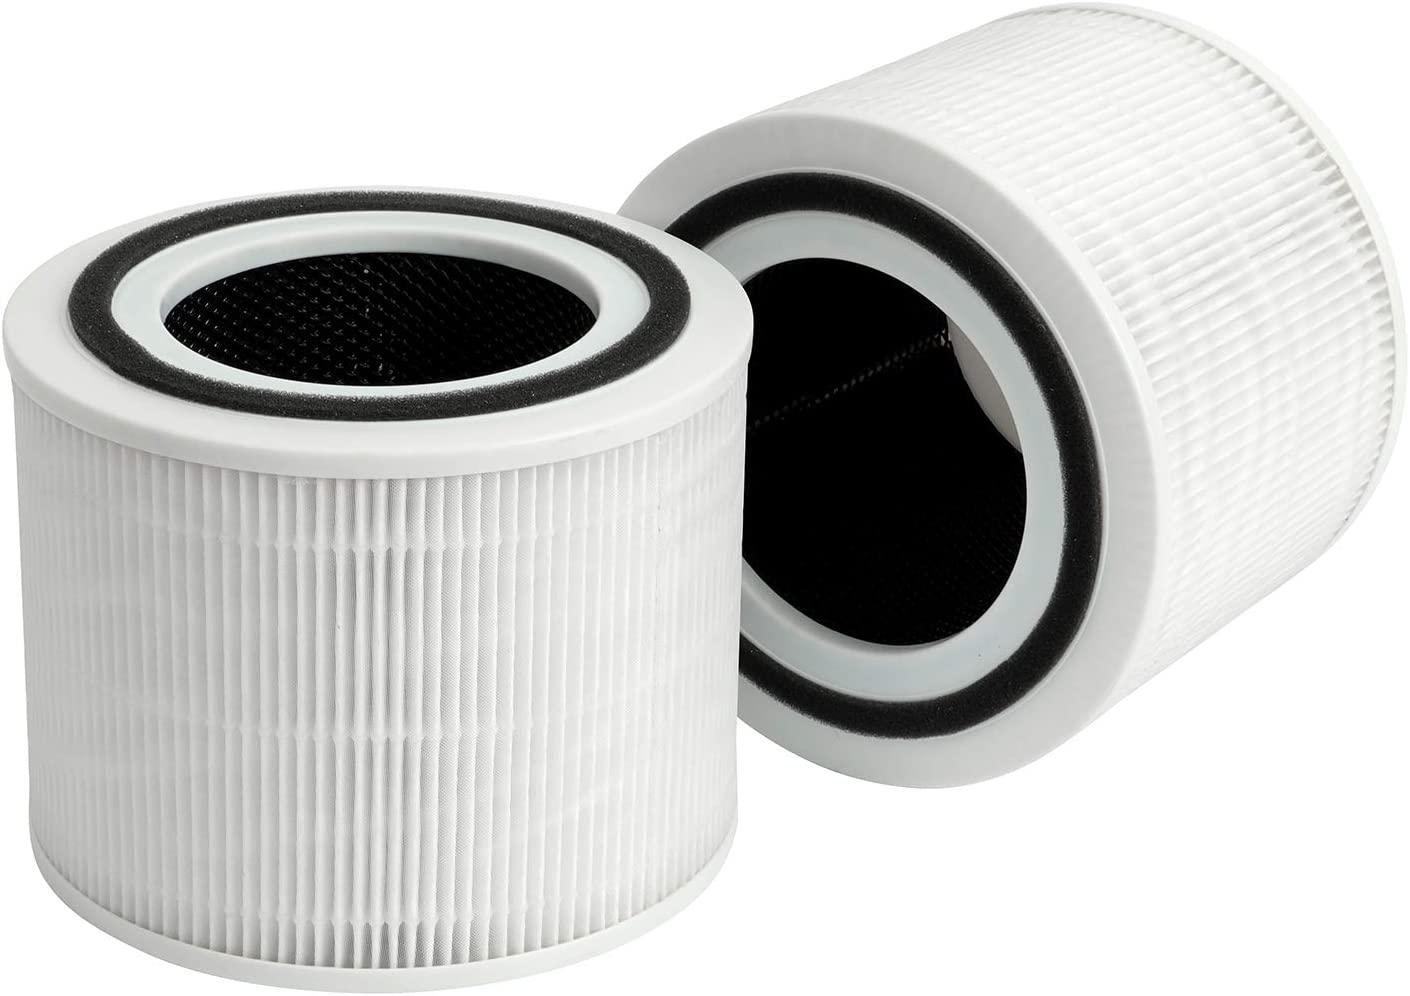 Smilyan LV-PUR131 Filter Replacement Compatible with LEVOIT LV-PUR131,  LV-PUR131S, LV-PUR131-RF Air Purifier, 2 Pack Filters with 2-Pack  Pre-filters